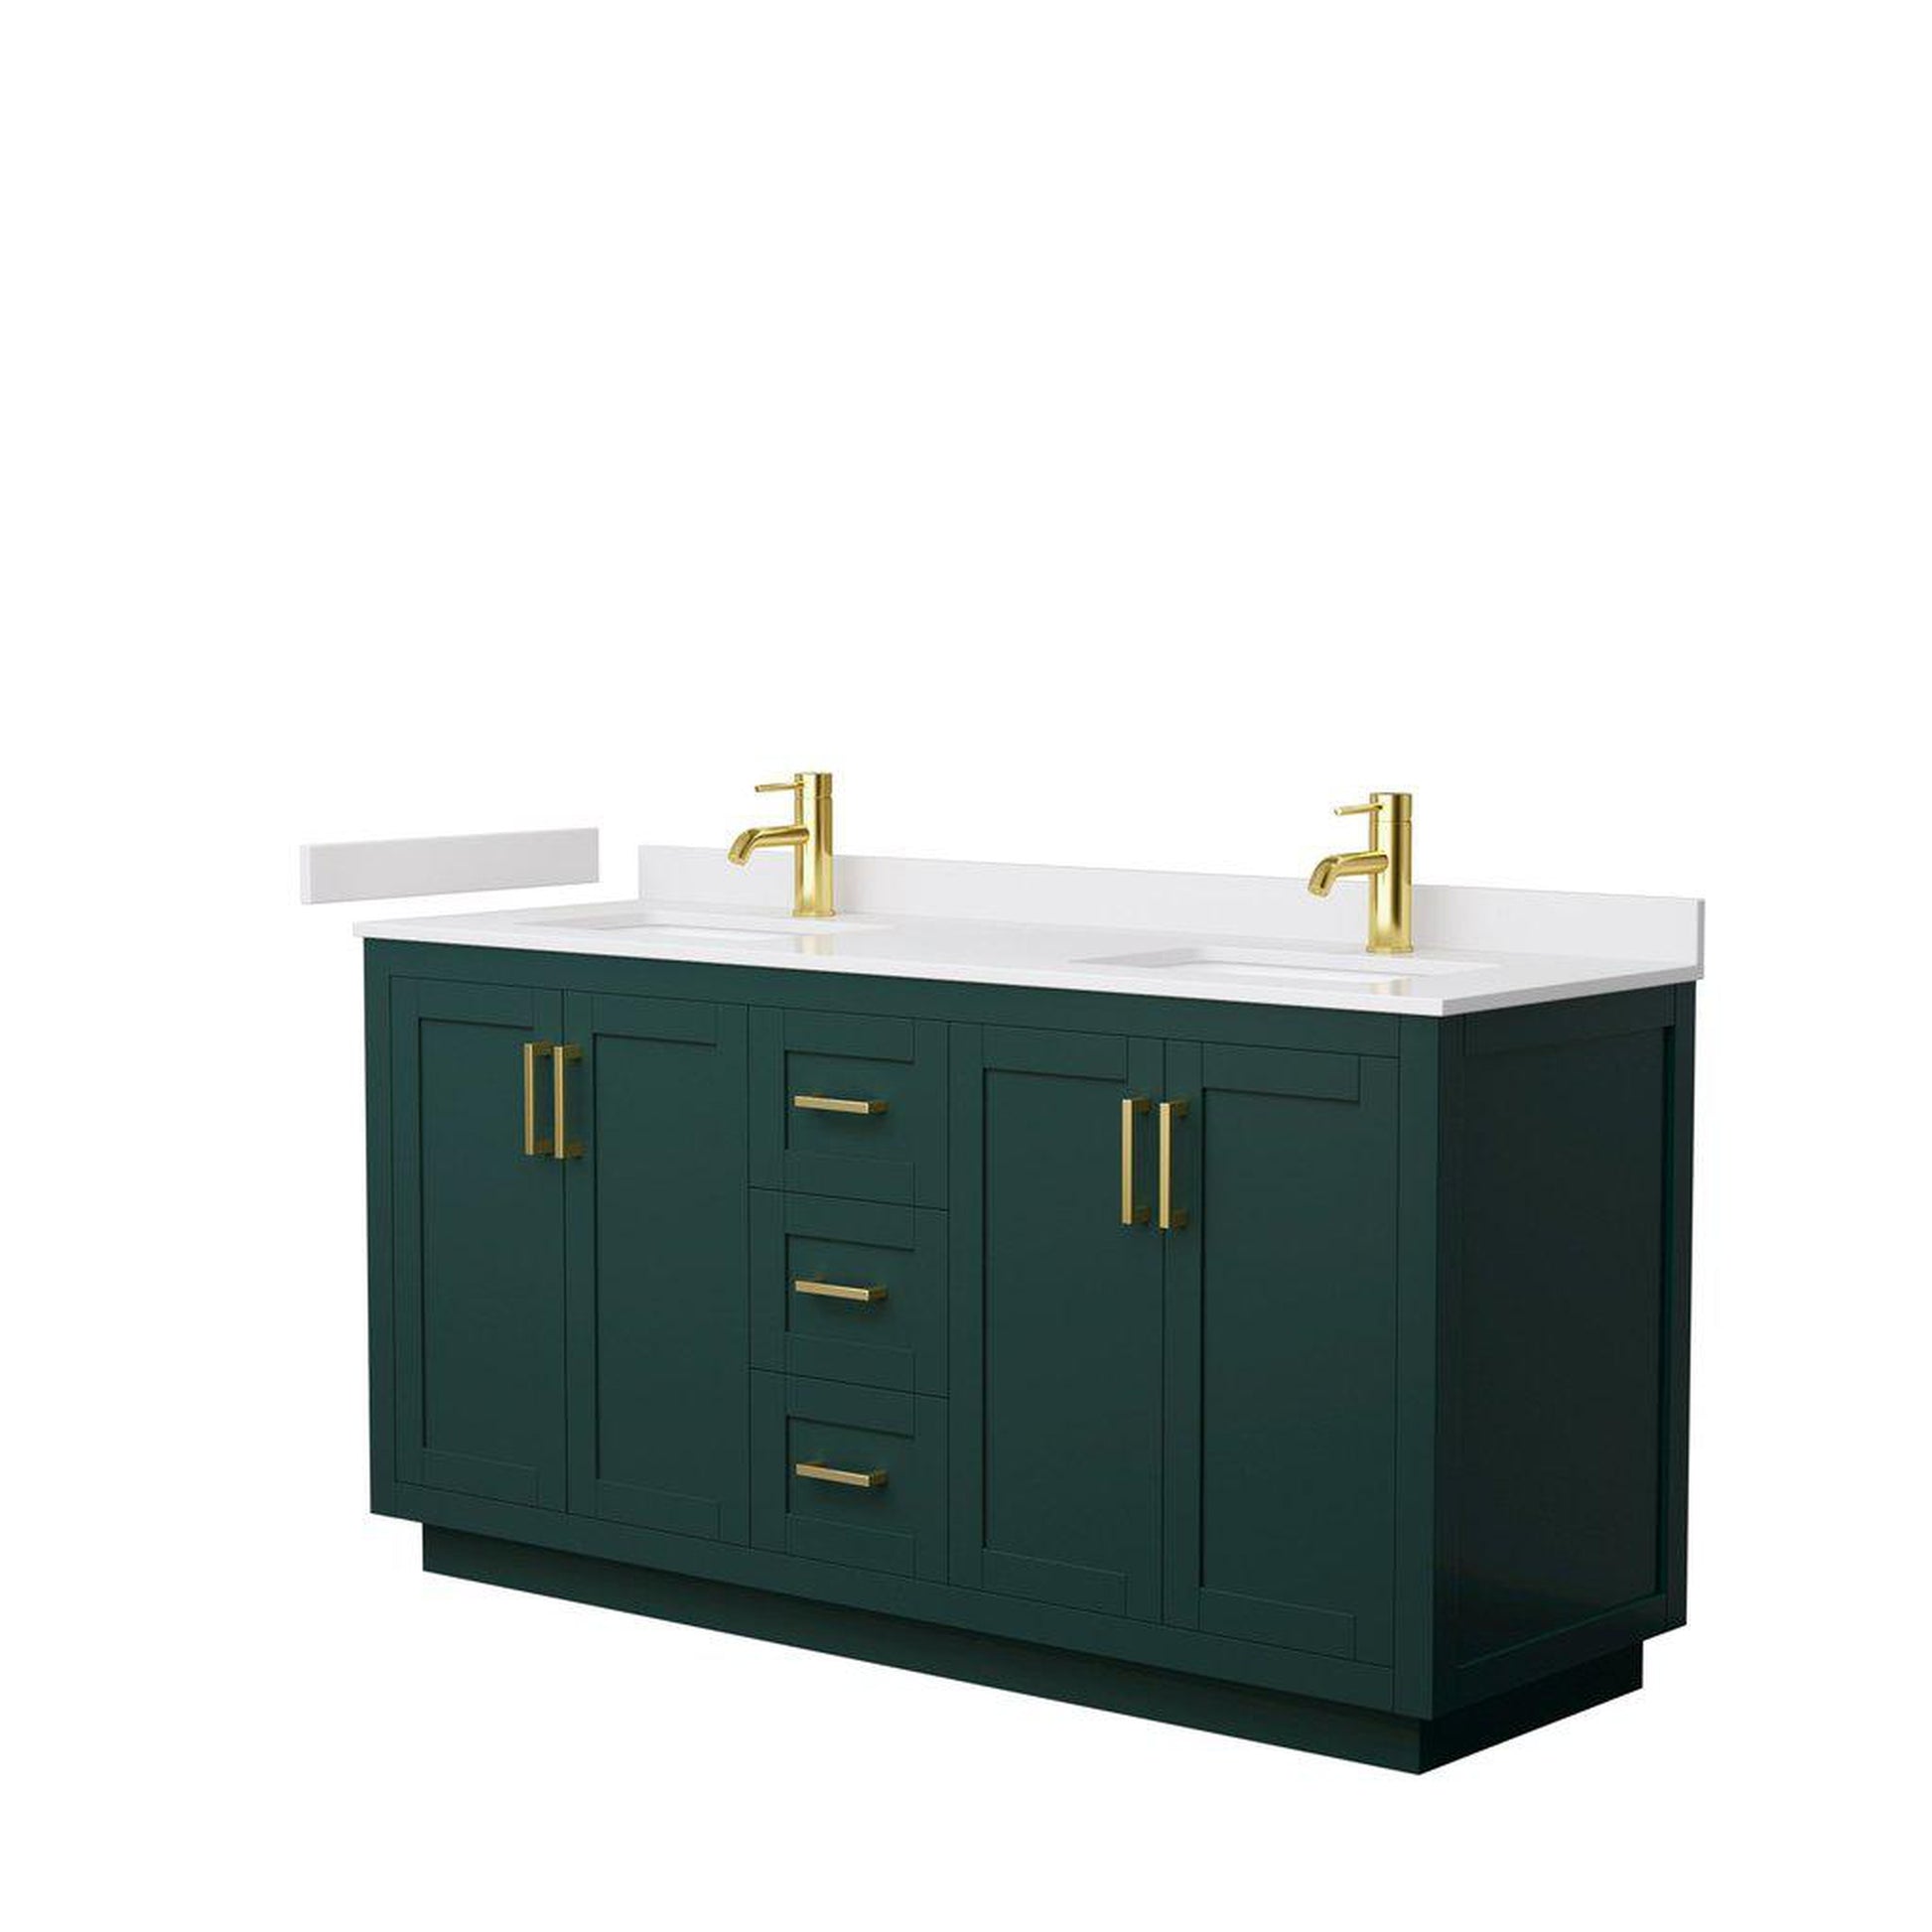 Wyndham Collection Miranda 66" Double Bathroom Green Vanity Set With White Cultured Marble Countertop, Undermount Square Sink, And Brushed Gold Trim